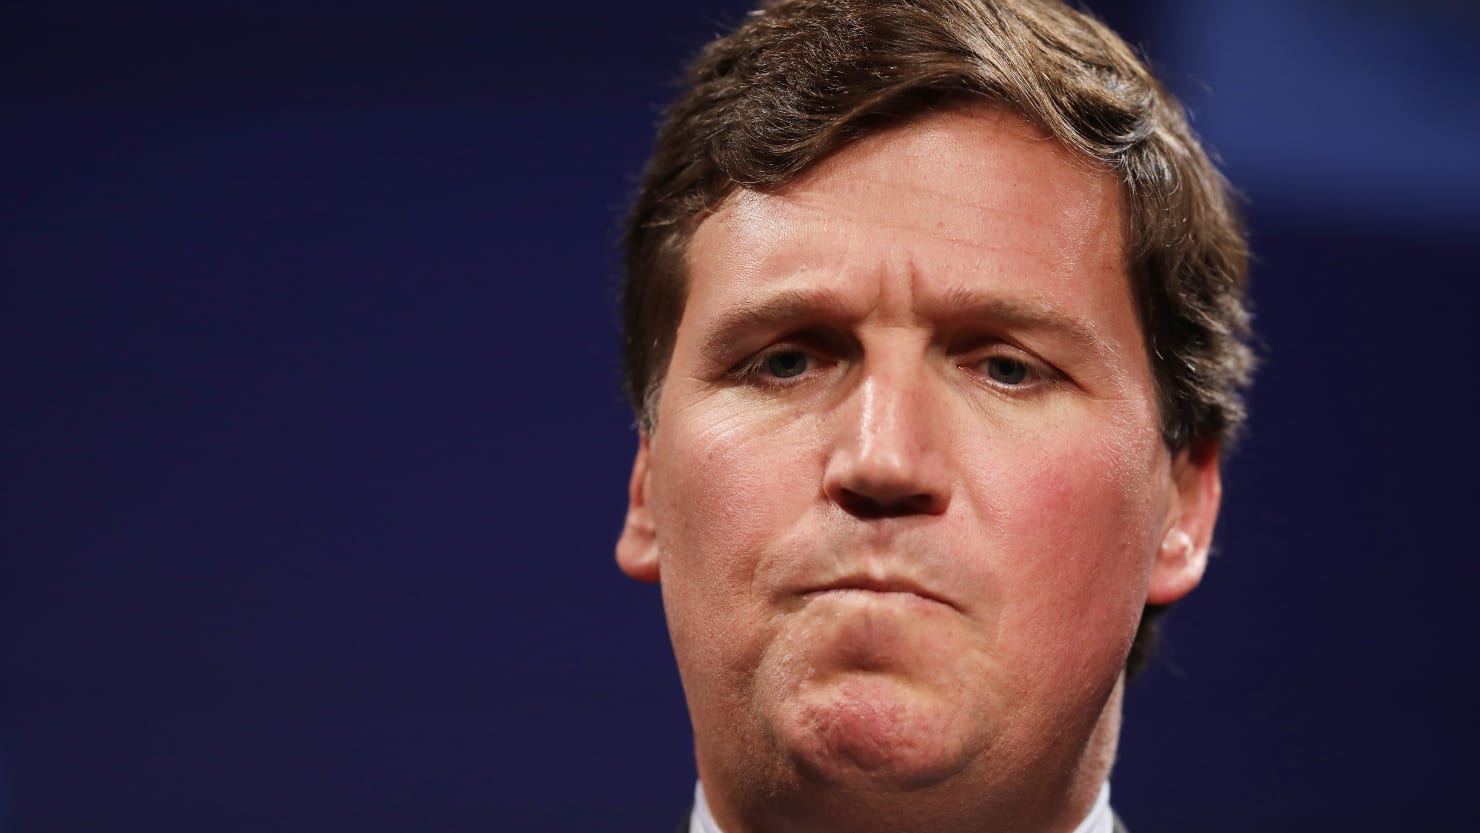 UPS Confirms Mystery Tucker Carlson Package Disappeared in Its System